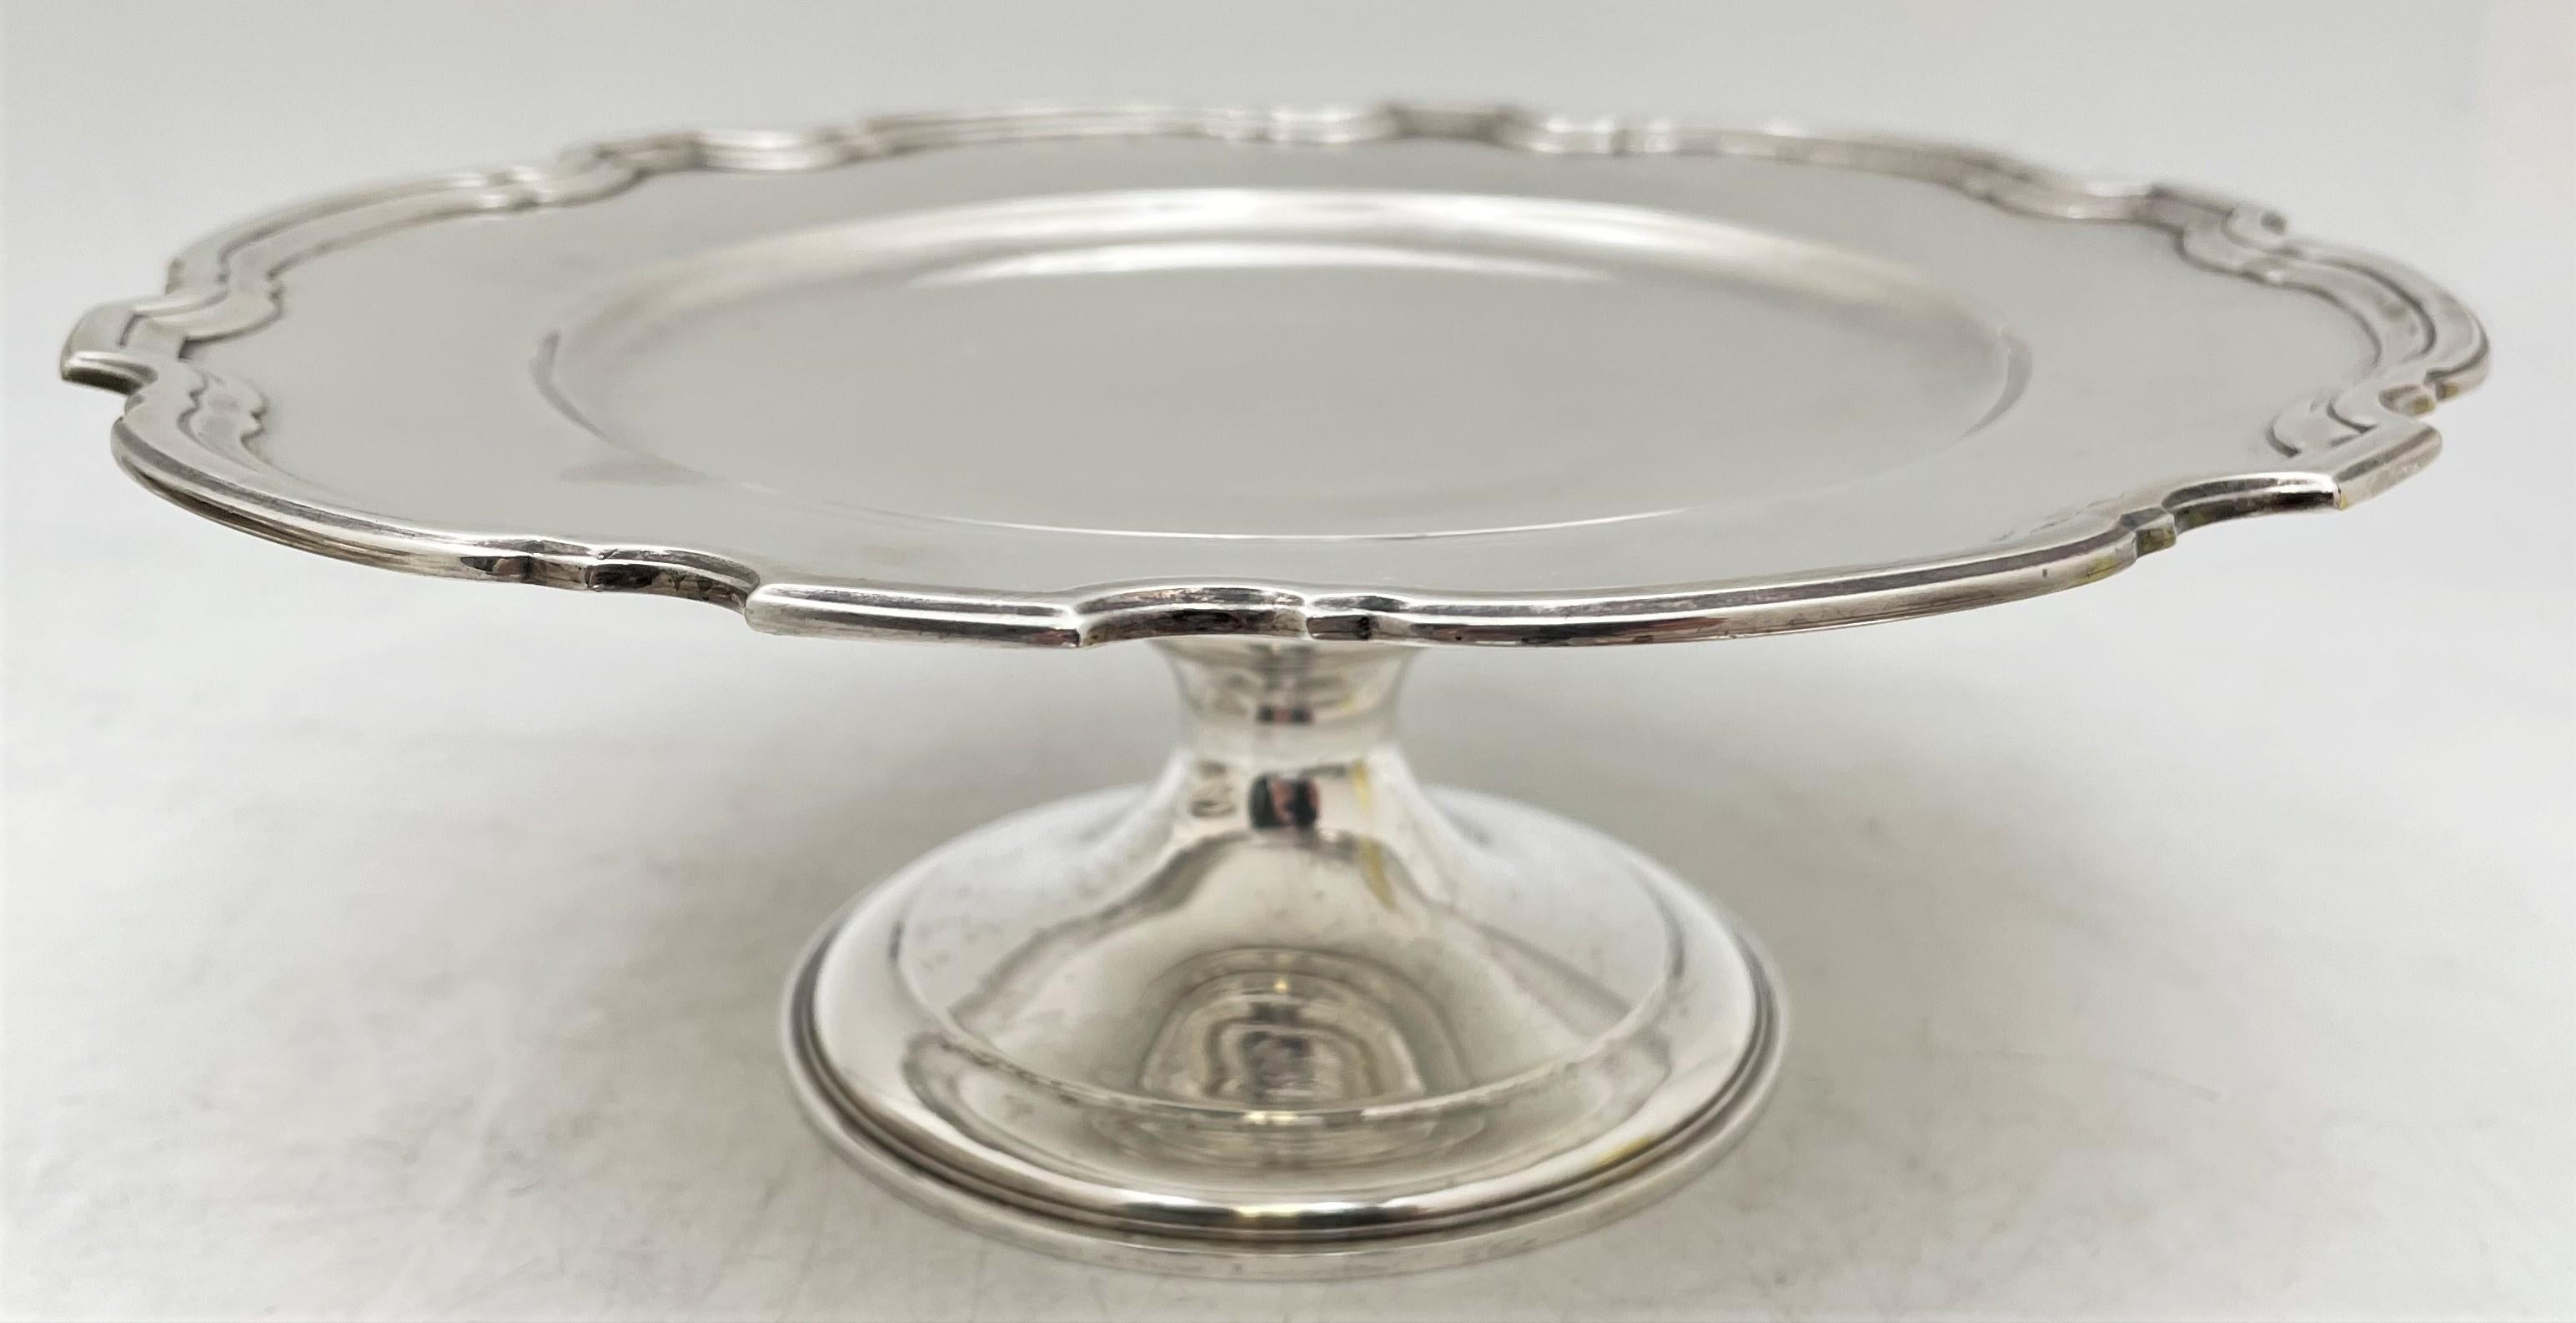 Tiffany & Co. sterling silver tazza or footed dish in Hampton pattern number 20270 from 1923 and in Art Deco Style with a wide-shaped, geometrically inclined, curvilinear rim. It measures 9'' in diameter by 3 1/2'' in height, weighs 19 troy ounces,